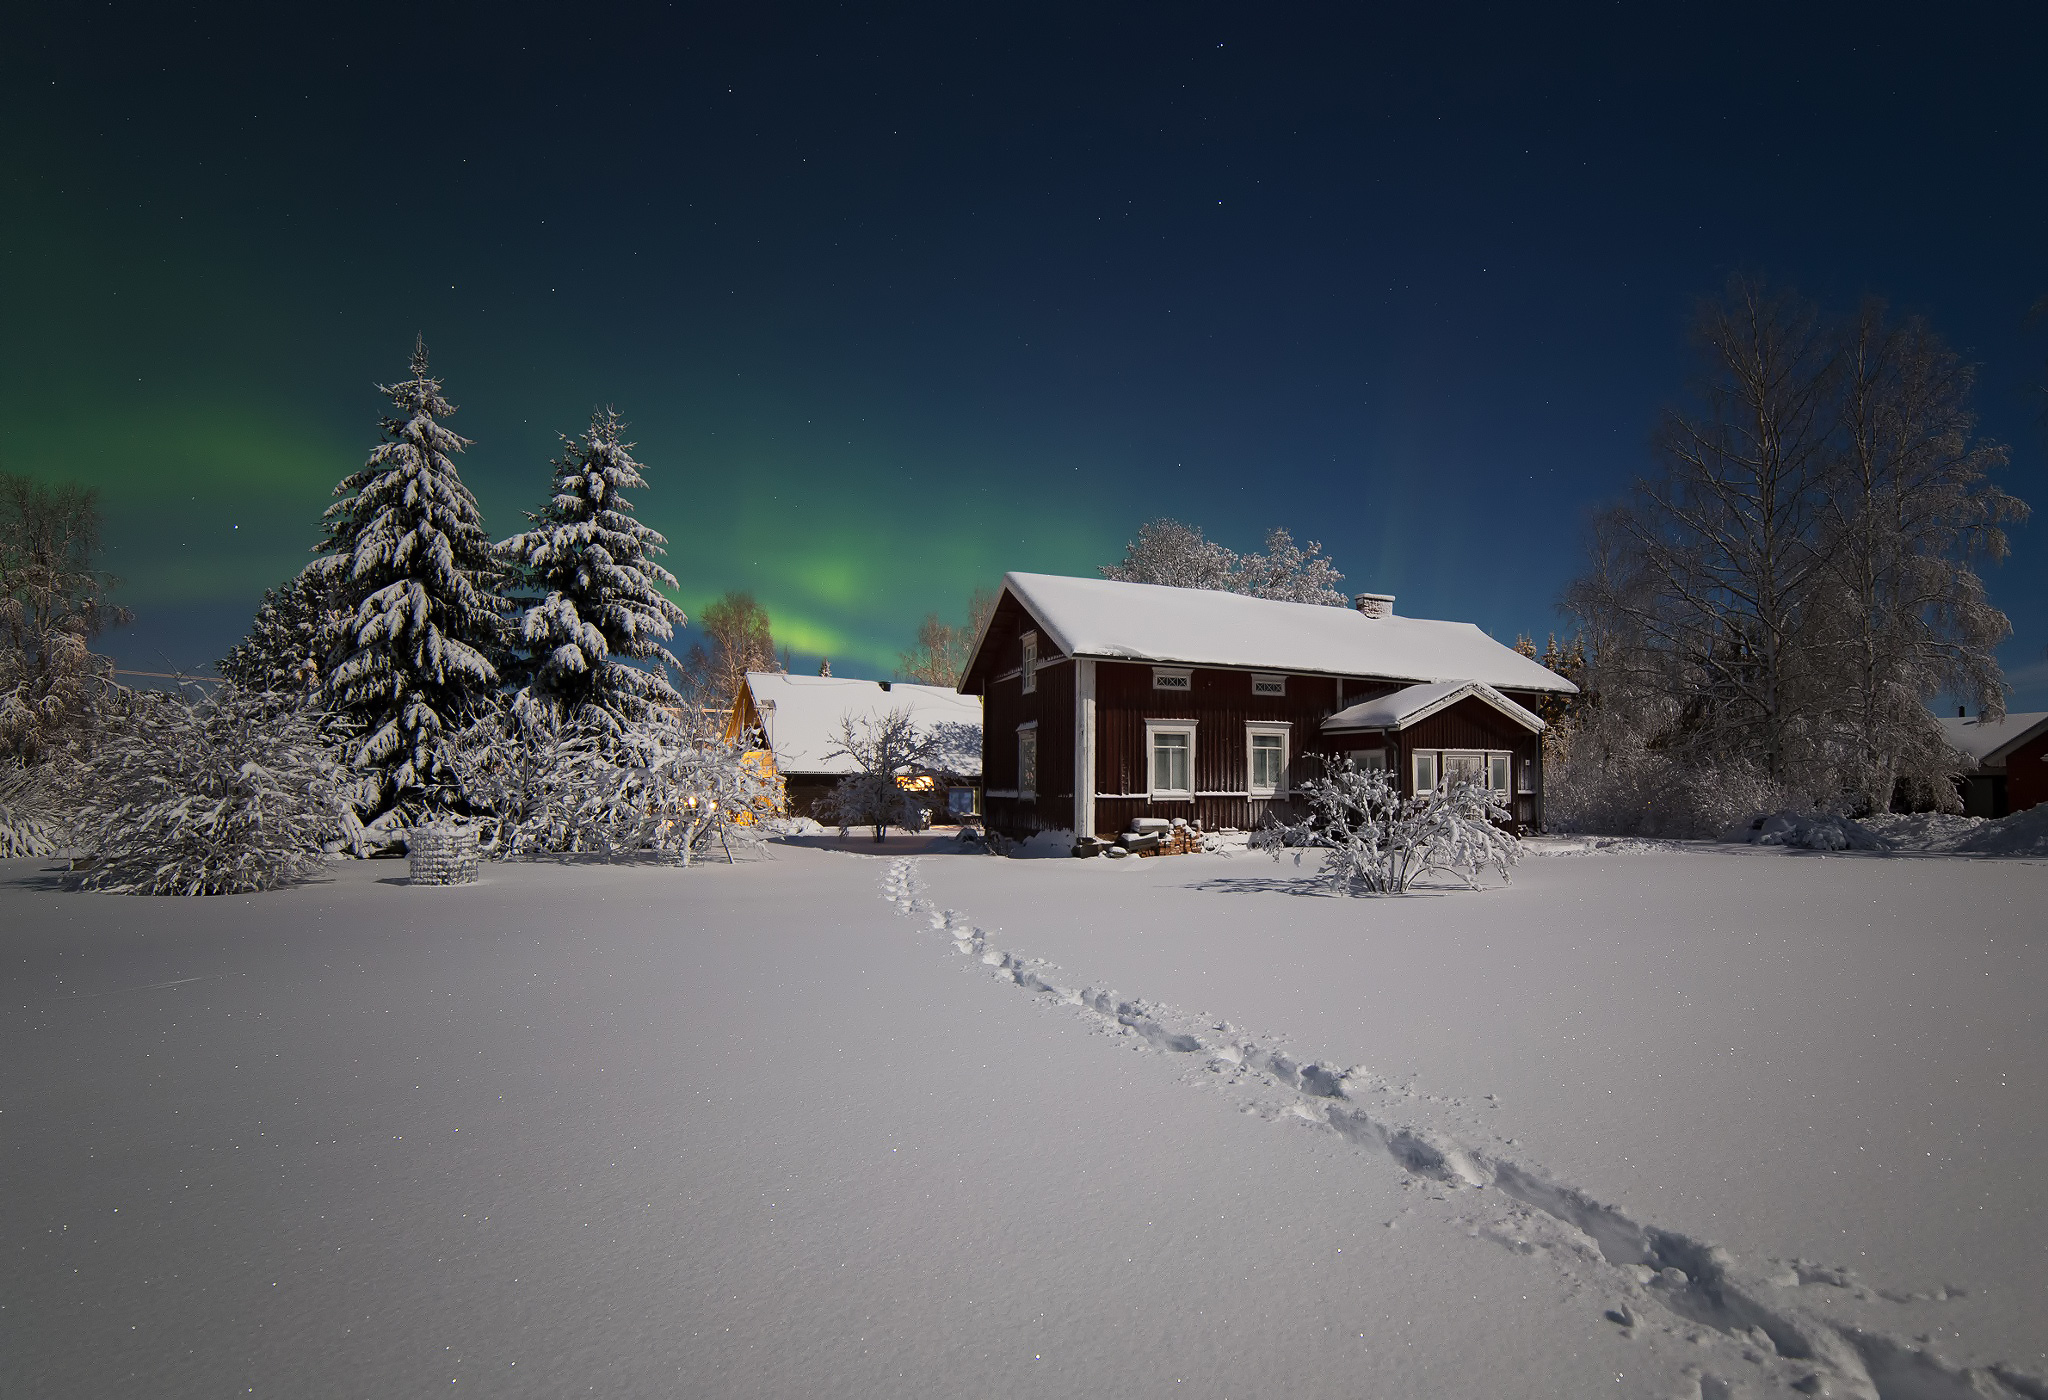 android winter, house, snow, aurora borealis, trees, nature, northern lights